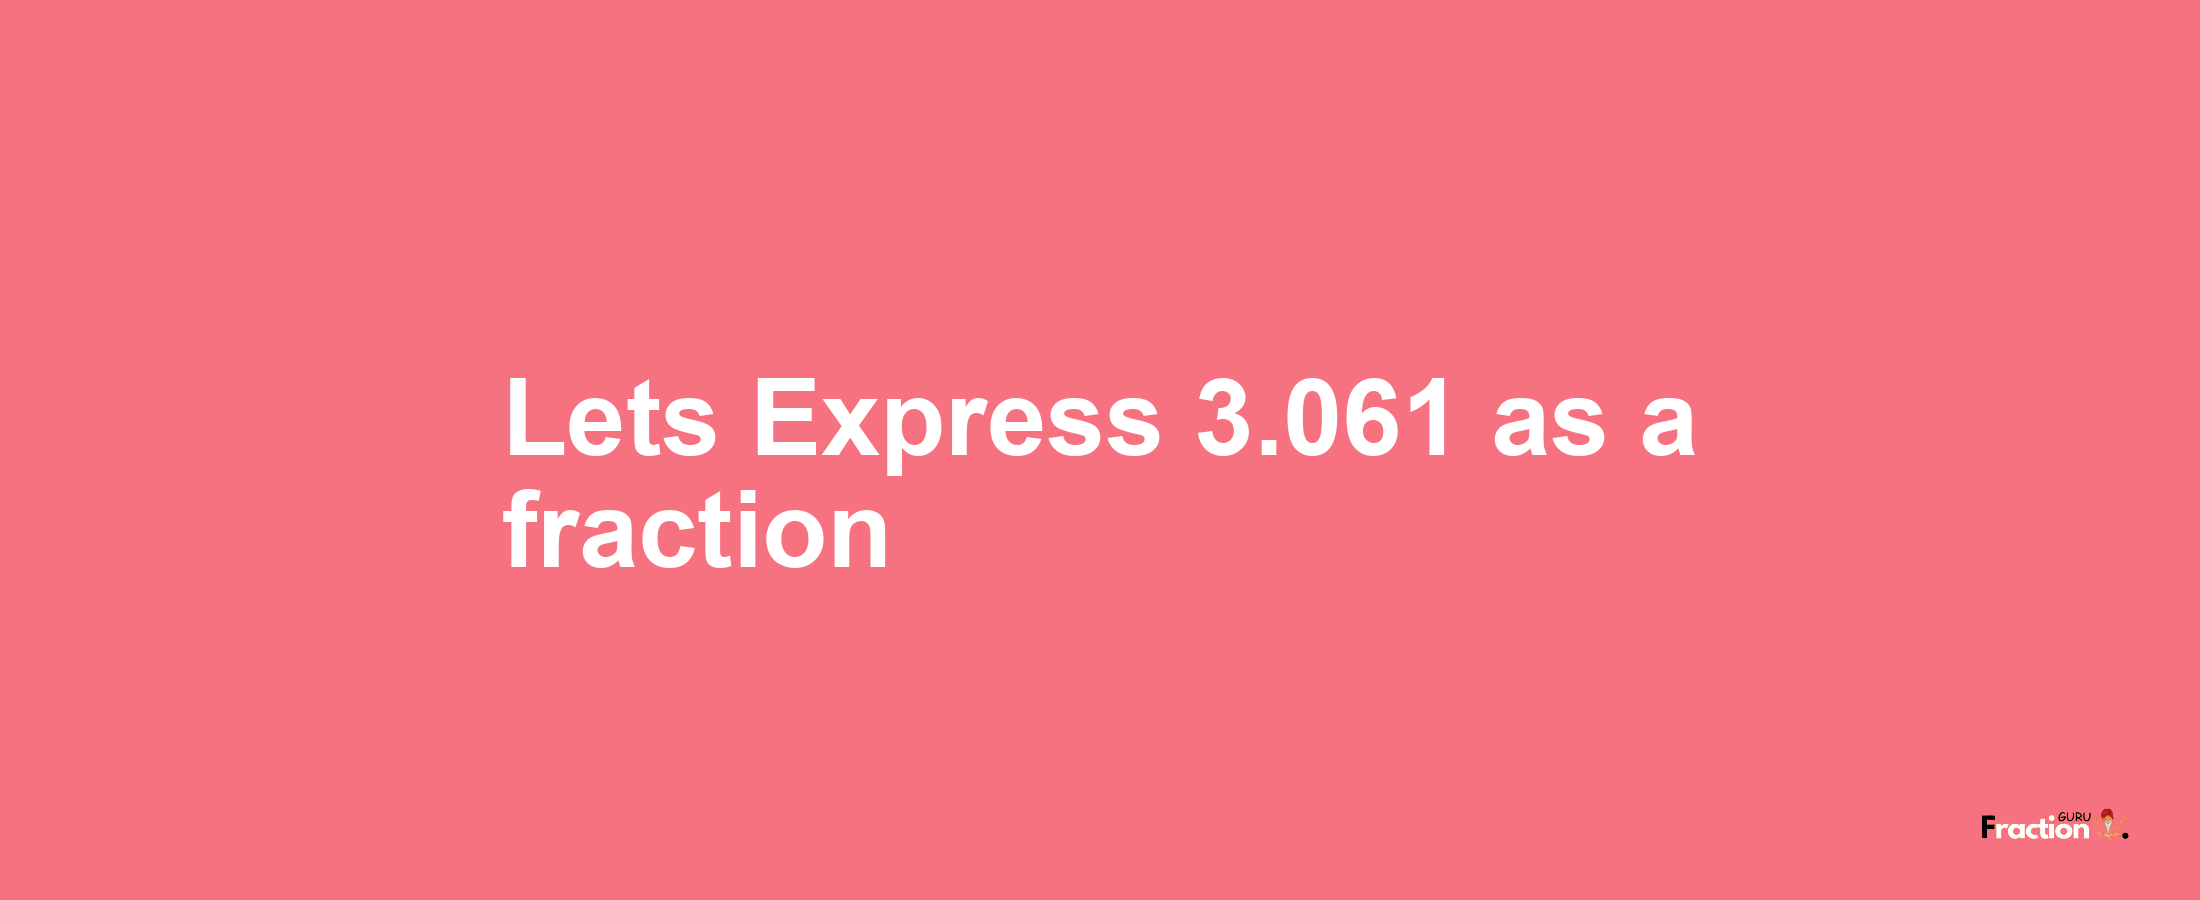 Lets Express 3.061 as afraction